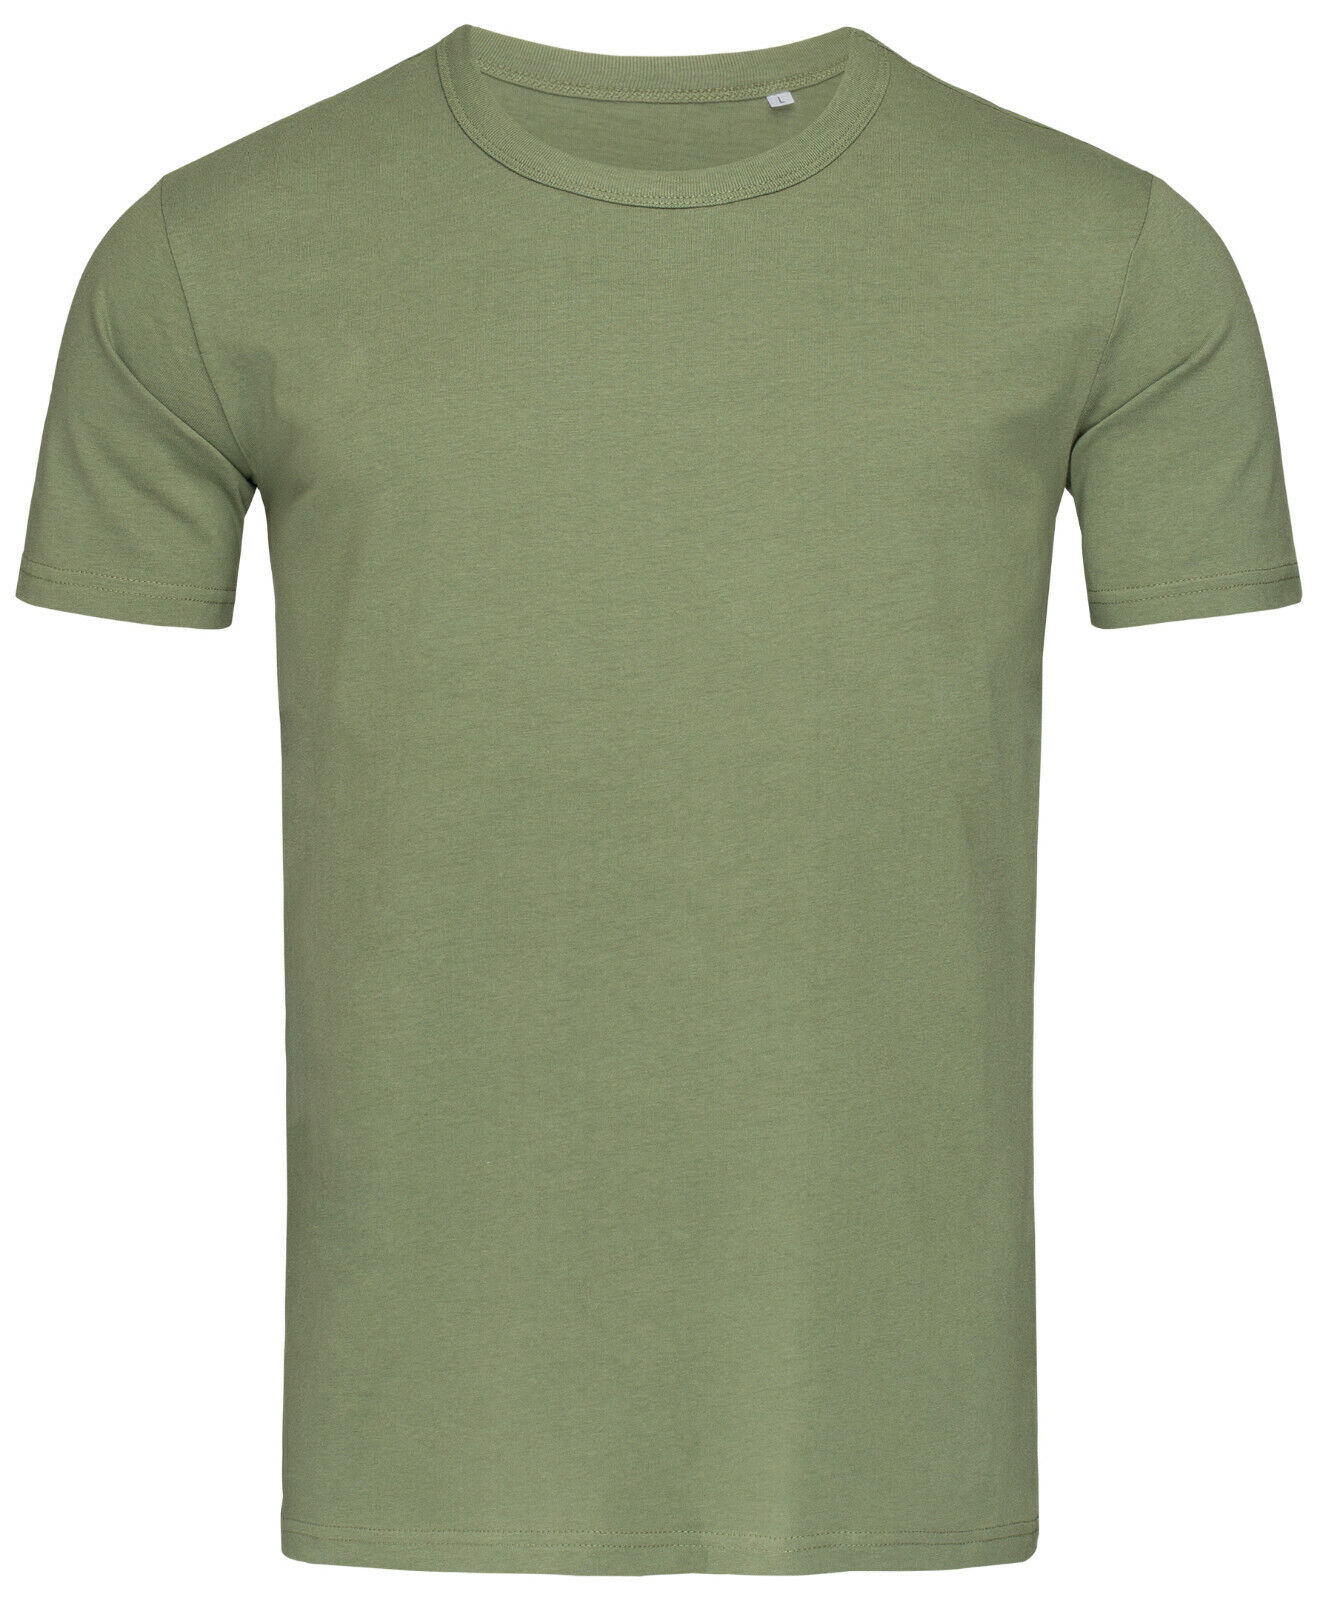 Plain Cotton ARMY KHAKI MILITARY FATIGUE GREEN Slim Fit Fitted T-Shirt ...